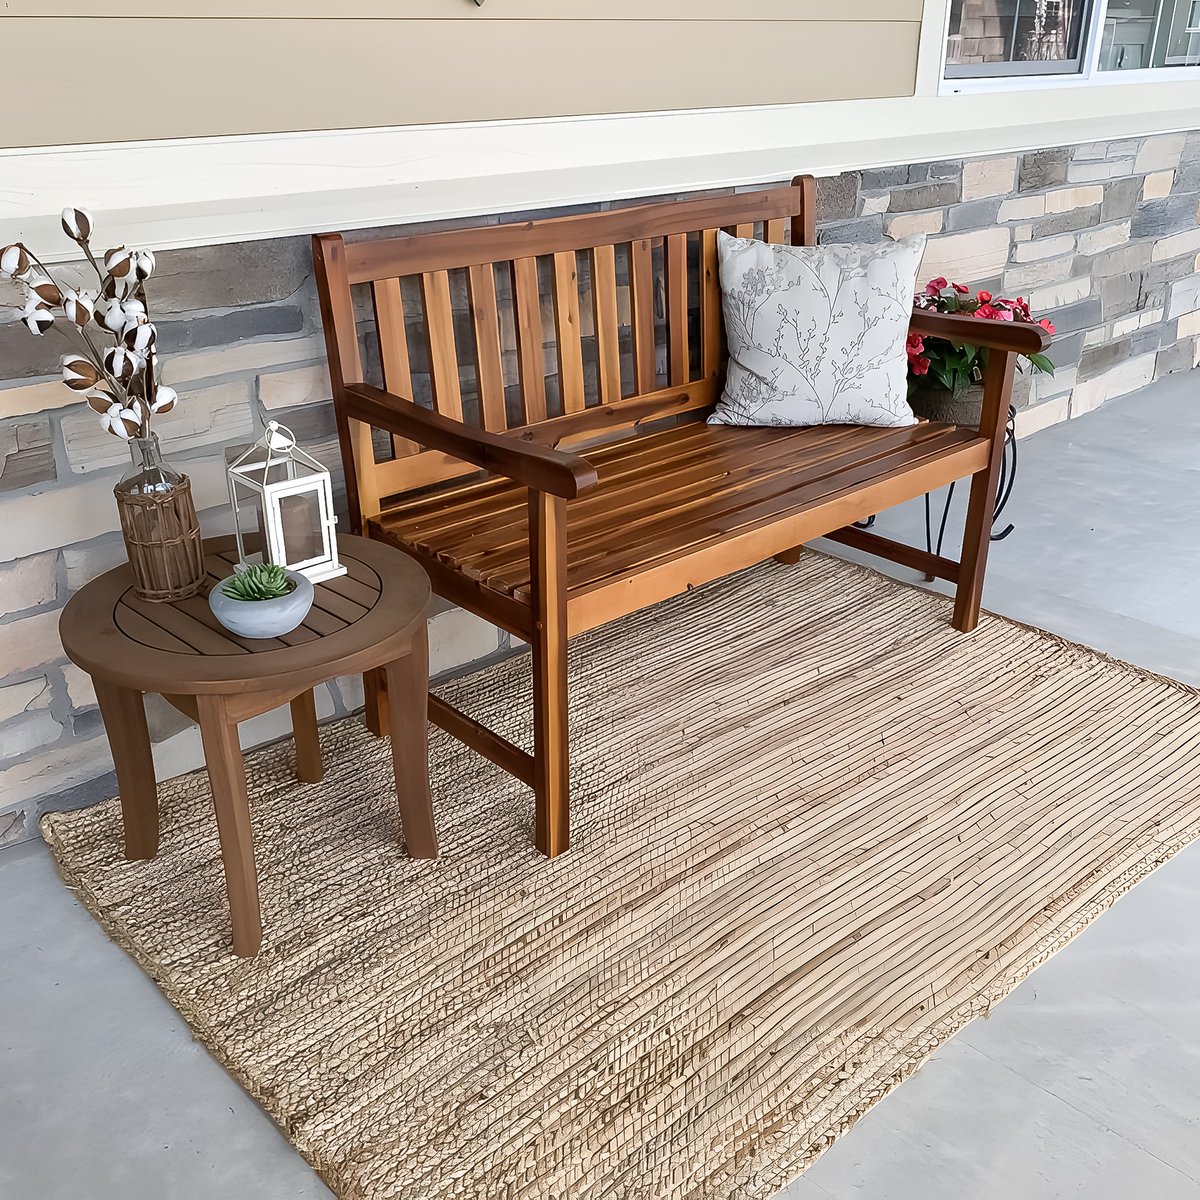 Sometimes, there's a unique charm to wooden furniture.💥 🥰
#heynemo
.
.
.
.
.
#woodenchair #outdoorbench #woodenfurniture #outdoorwoodenfurniture #outdoorchair #gardenchair #outdooroasis #setdesign #outdoorentertaining #patiotime  #backyarddesign #outdoorliving